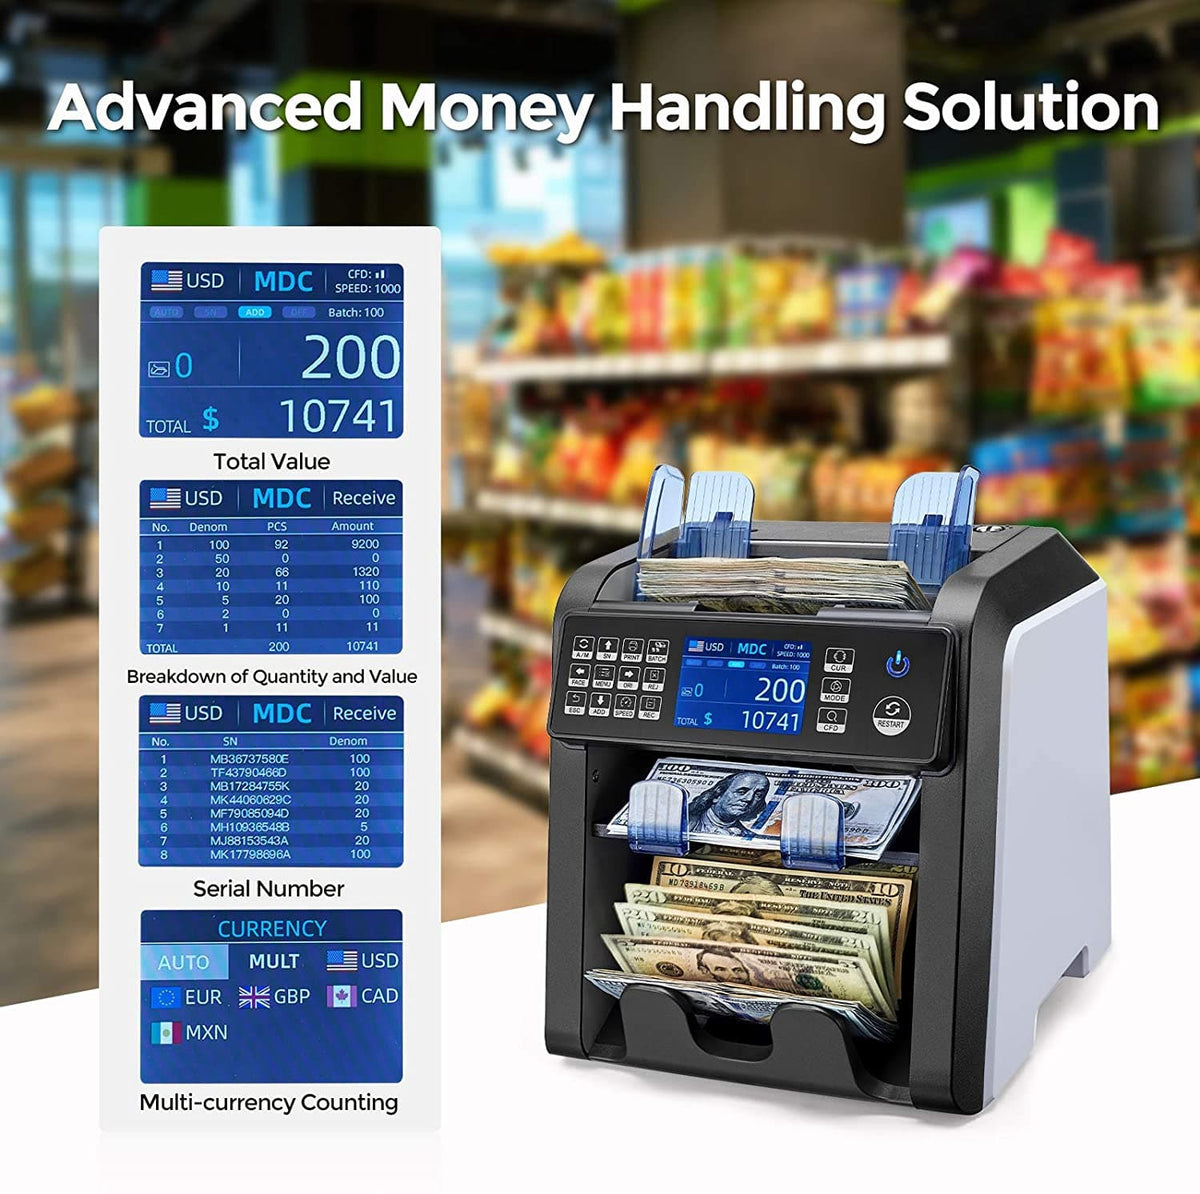 MUNBYN Mixed Denomination Bill Counter Sorter with Value Counting, 2 Pocket for Sorting, IMC08. Advanced money handling solution.Money counter New LCD Display Money Bill Counters Counterfeit Detector UV & MG Cash Bank.